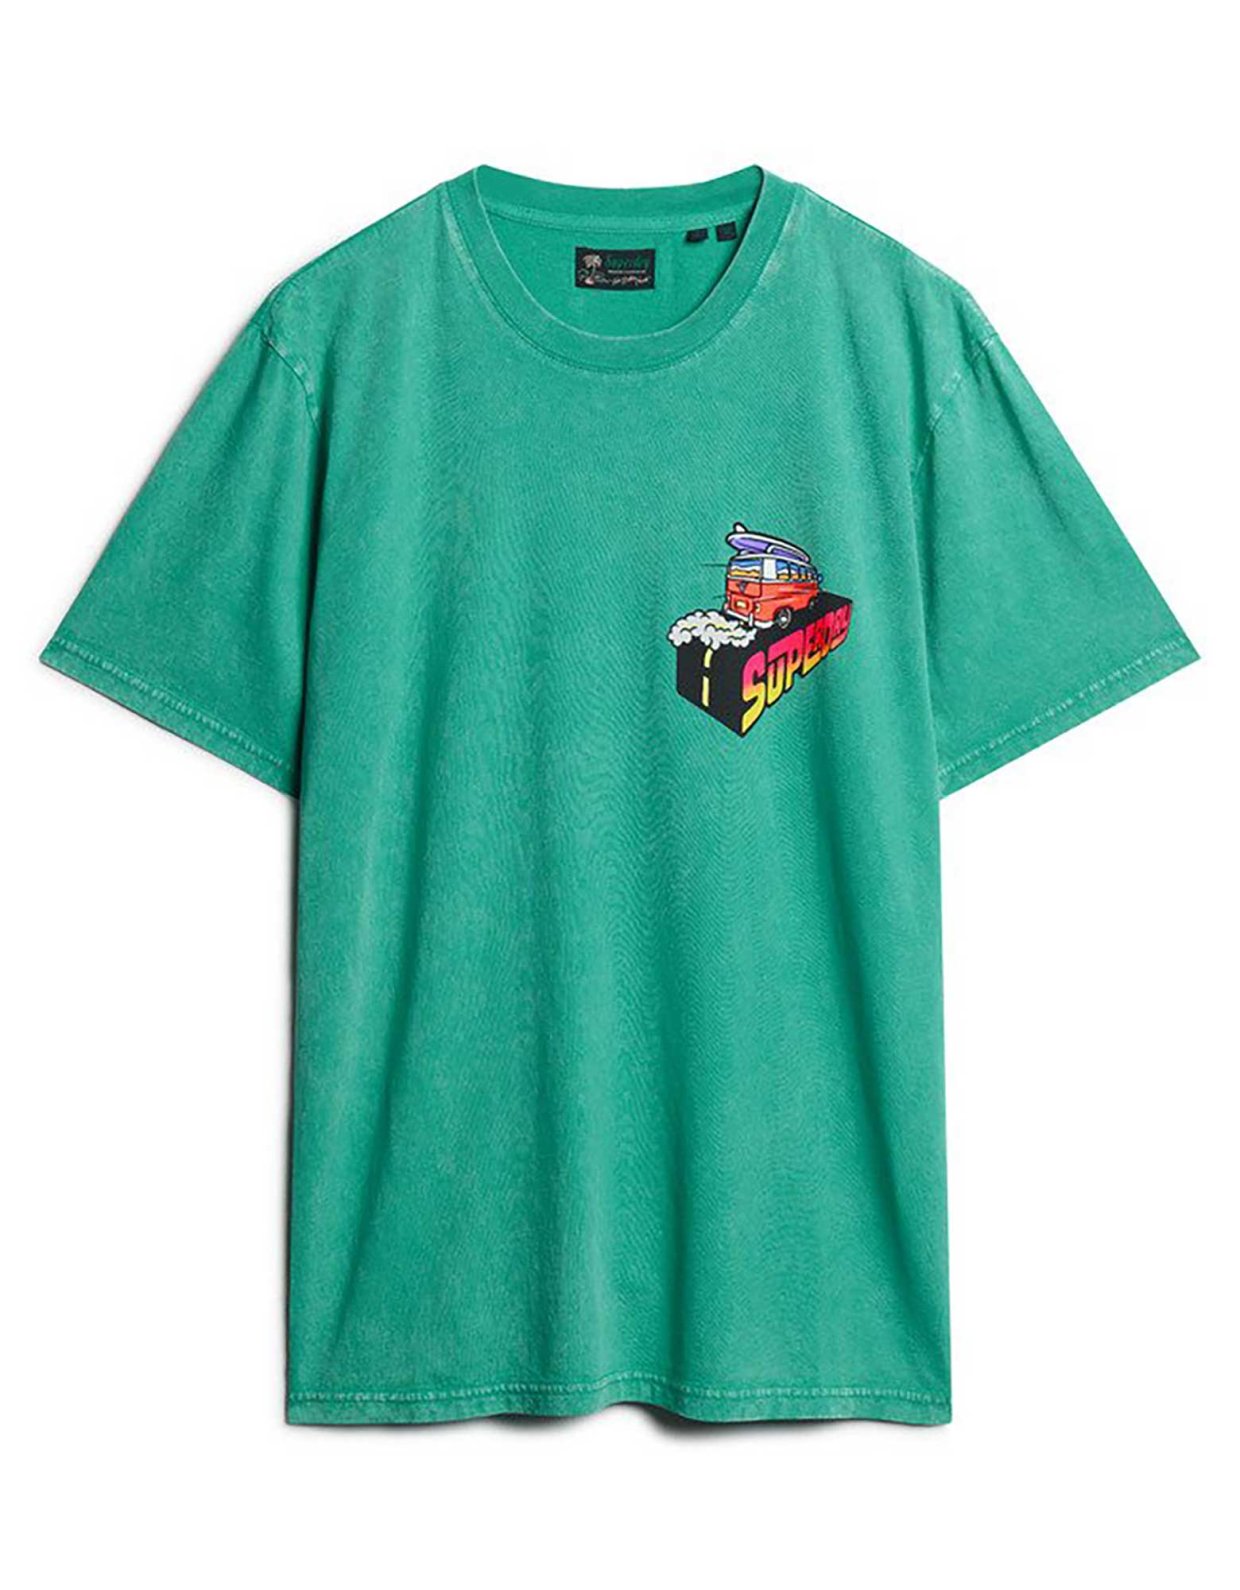 Superdry Neon travel chest loose tee cool green